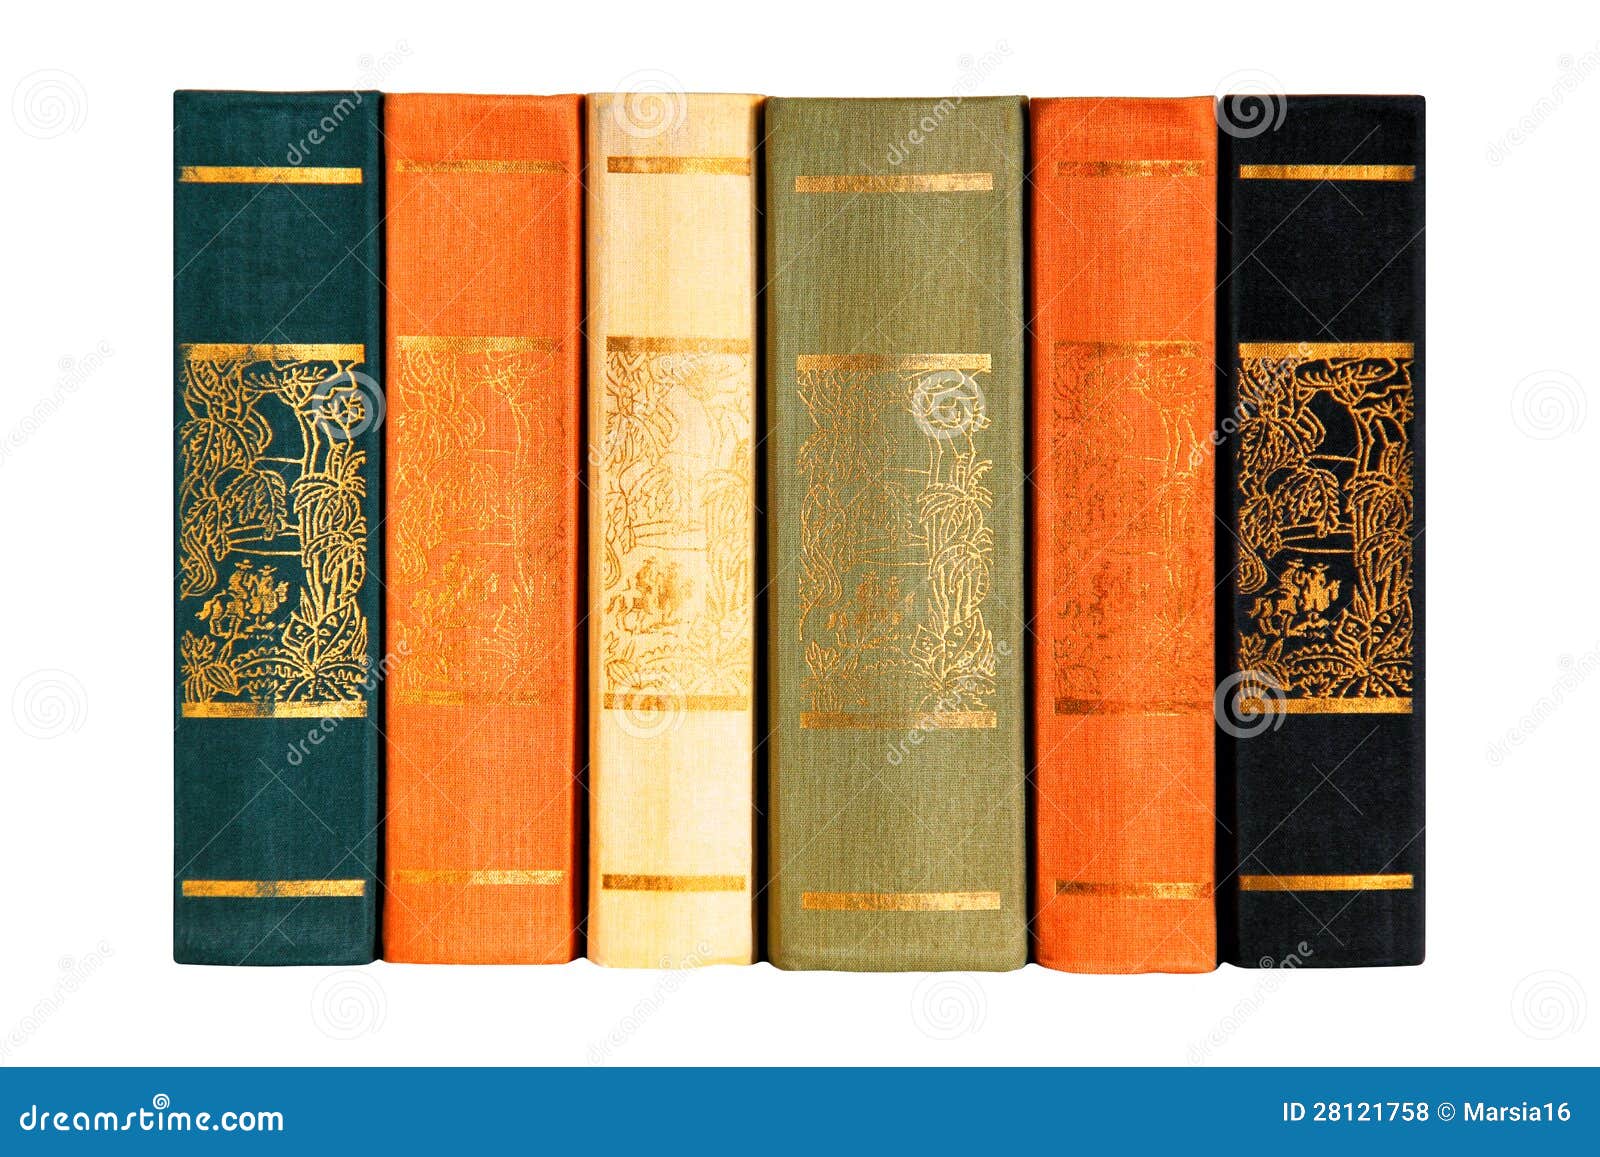 book collection of six volumes